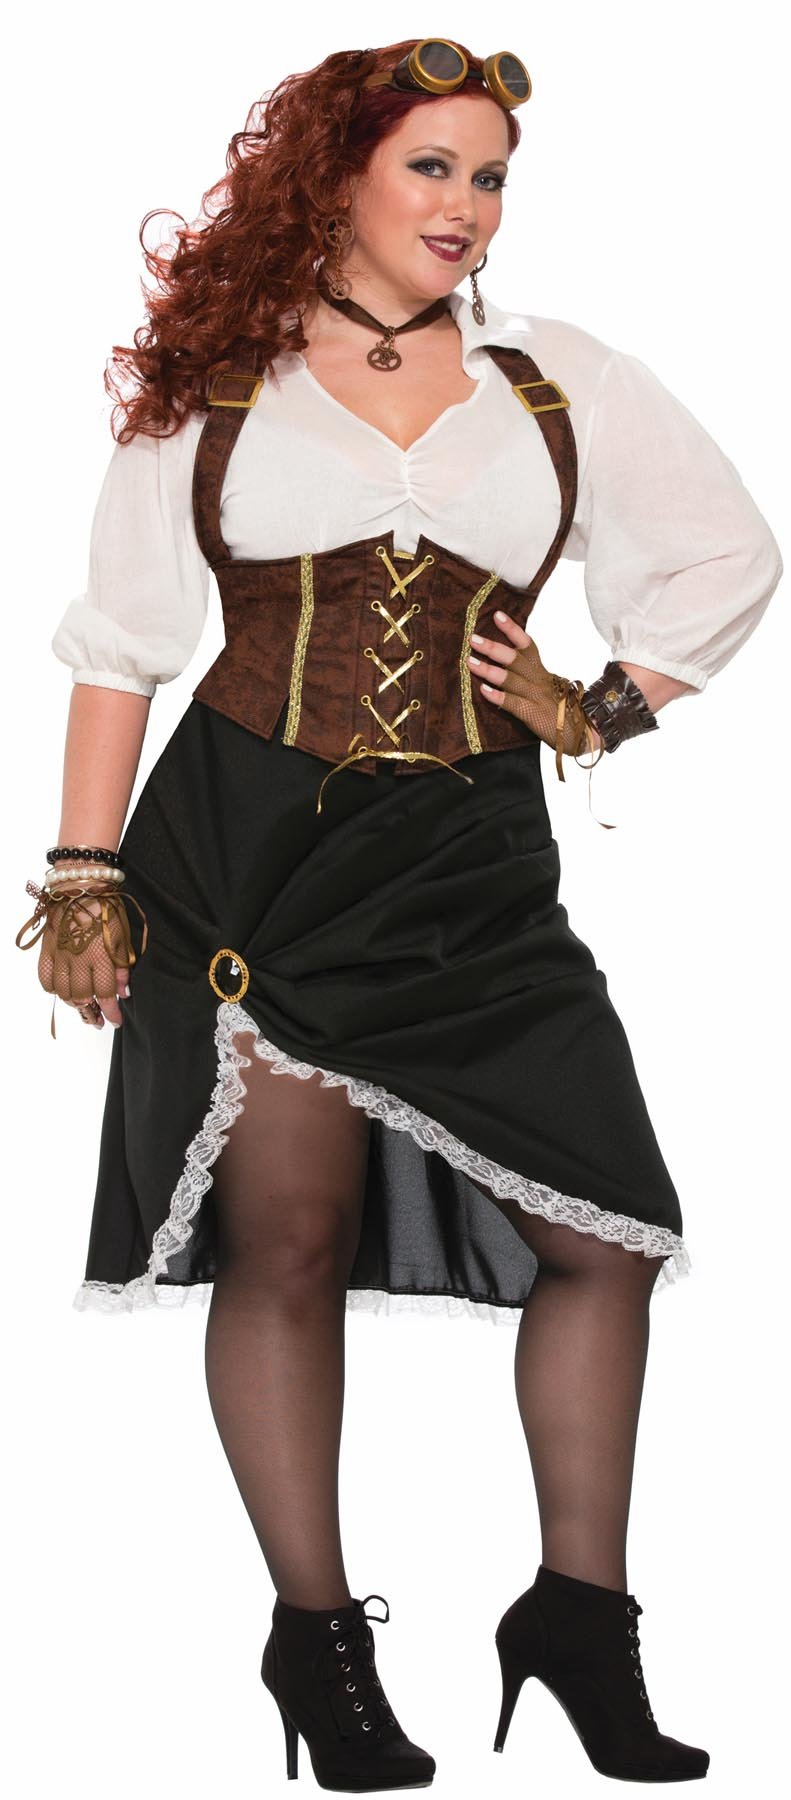 Brown corset and dress with light top and black skirt